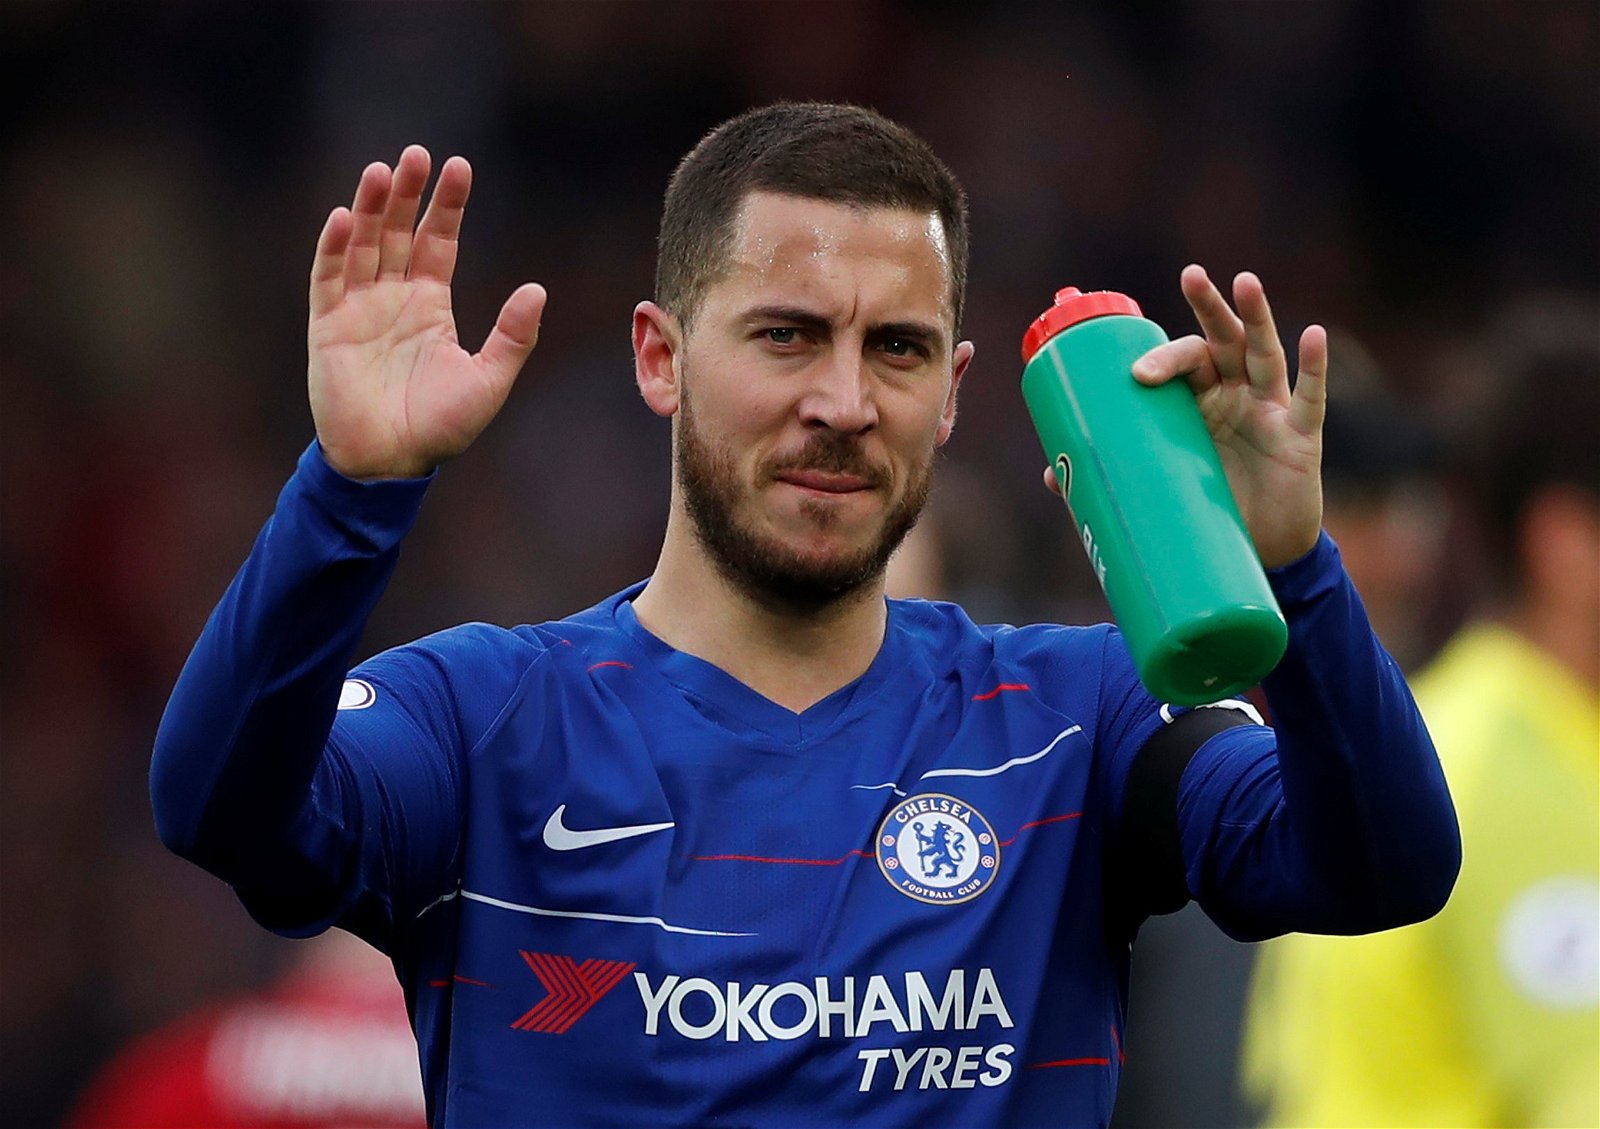 Former Chelsea star hopes Hazard will stay at Chelsea